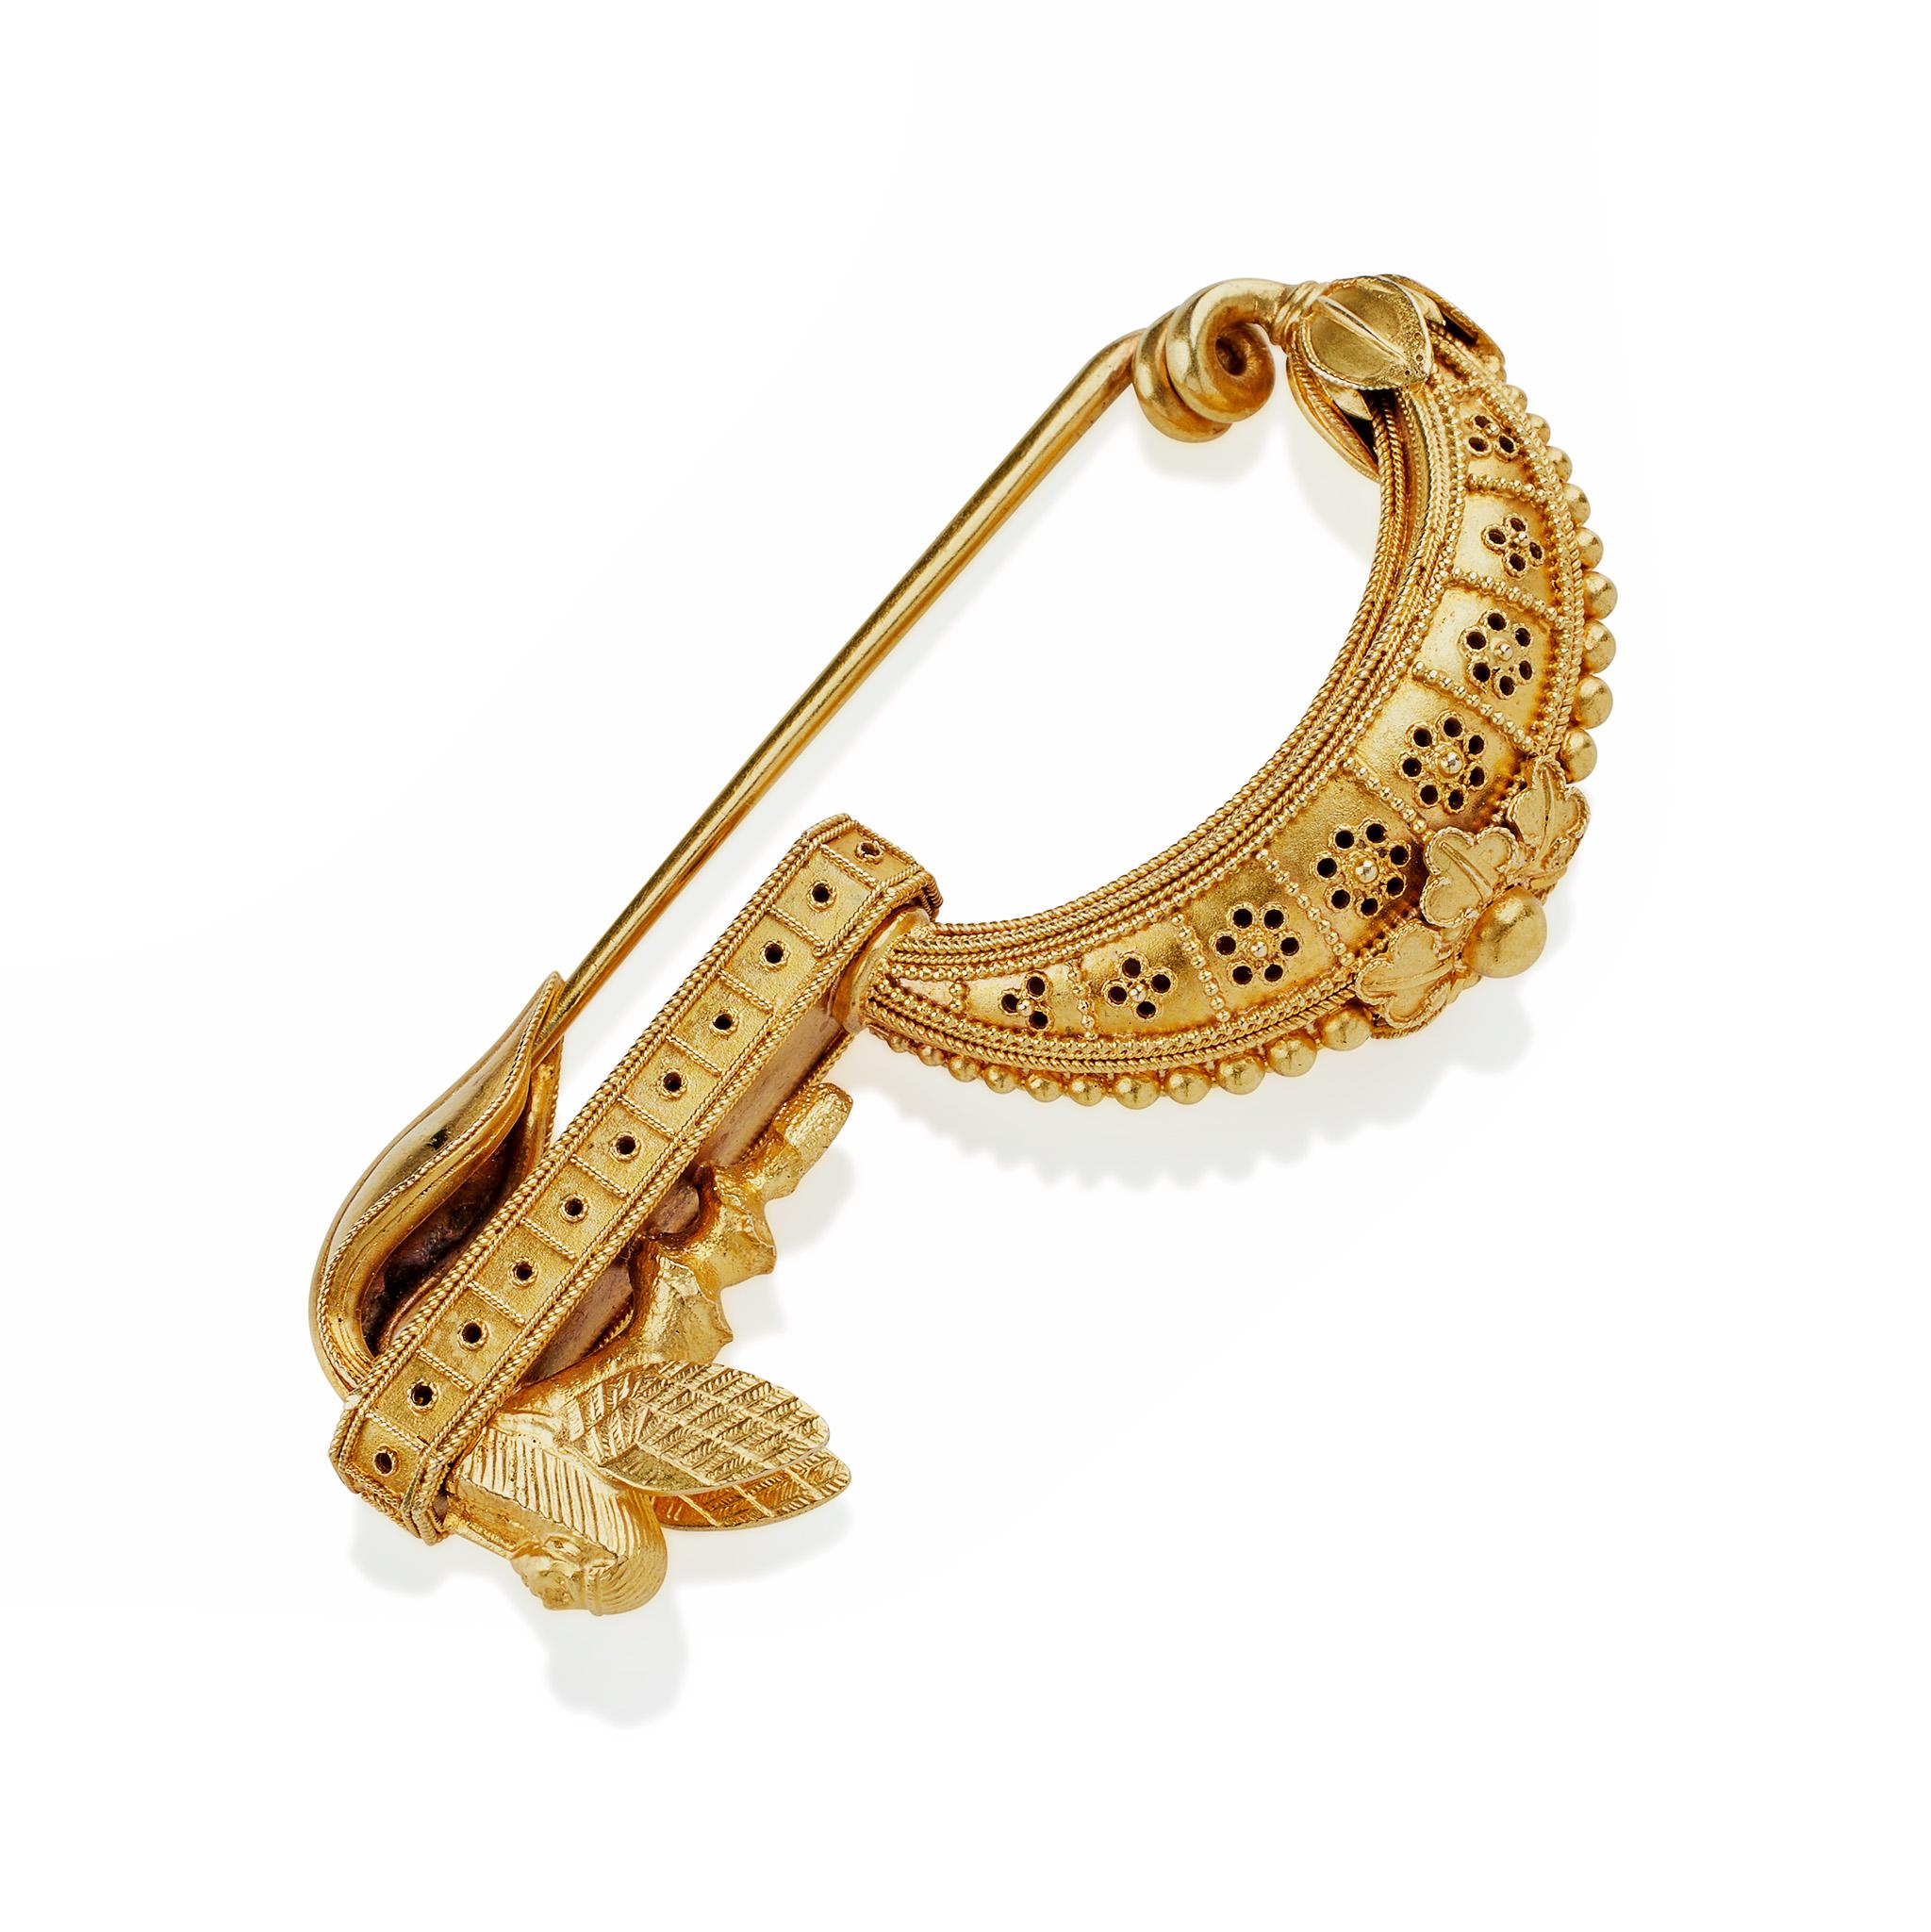 Archaeological Revival Fibula Brooch In Excellent Condition For Sale In New York, NY